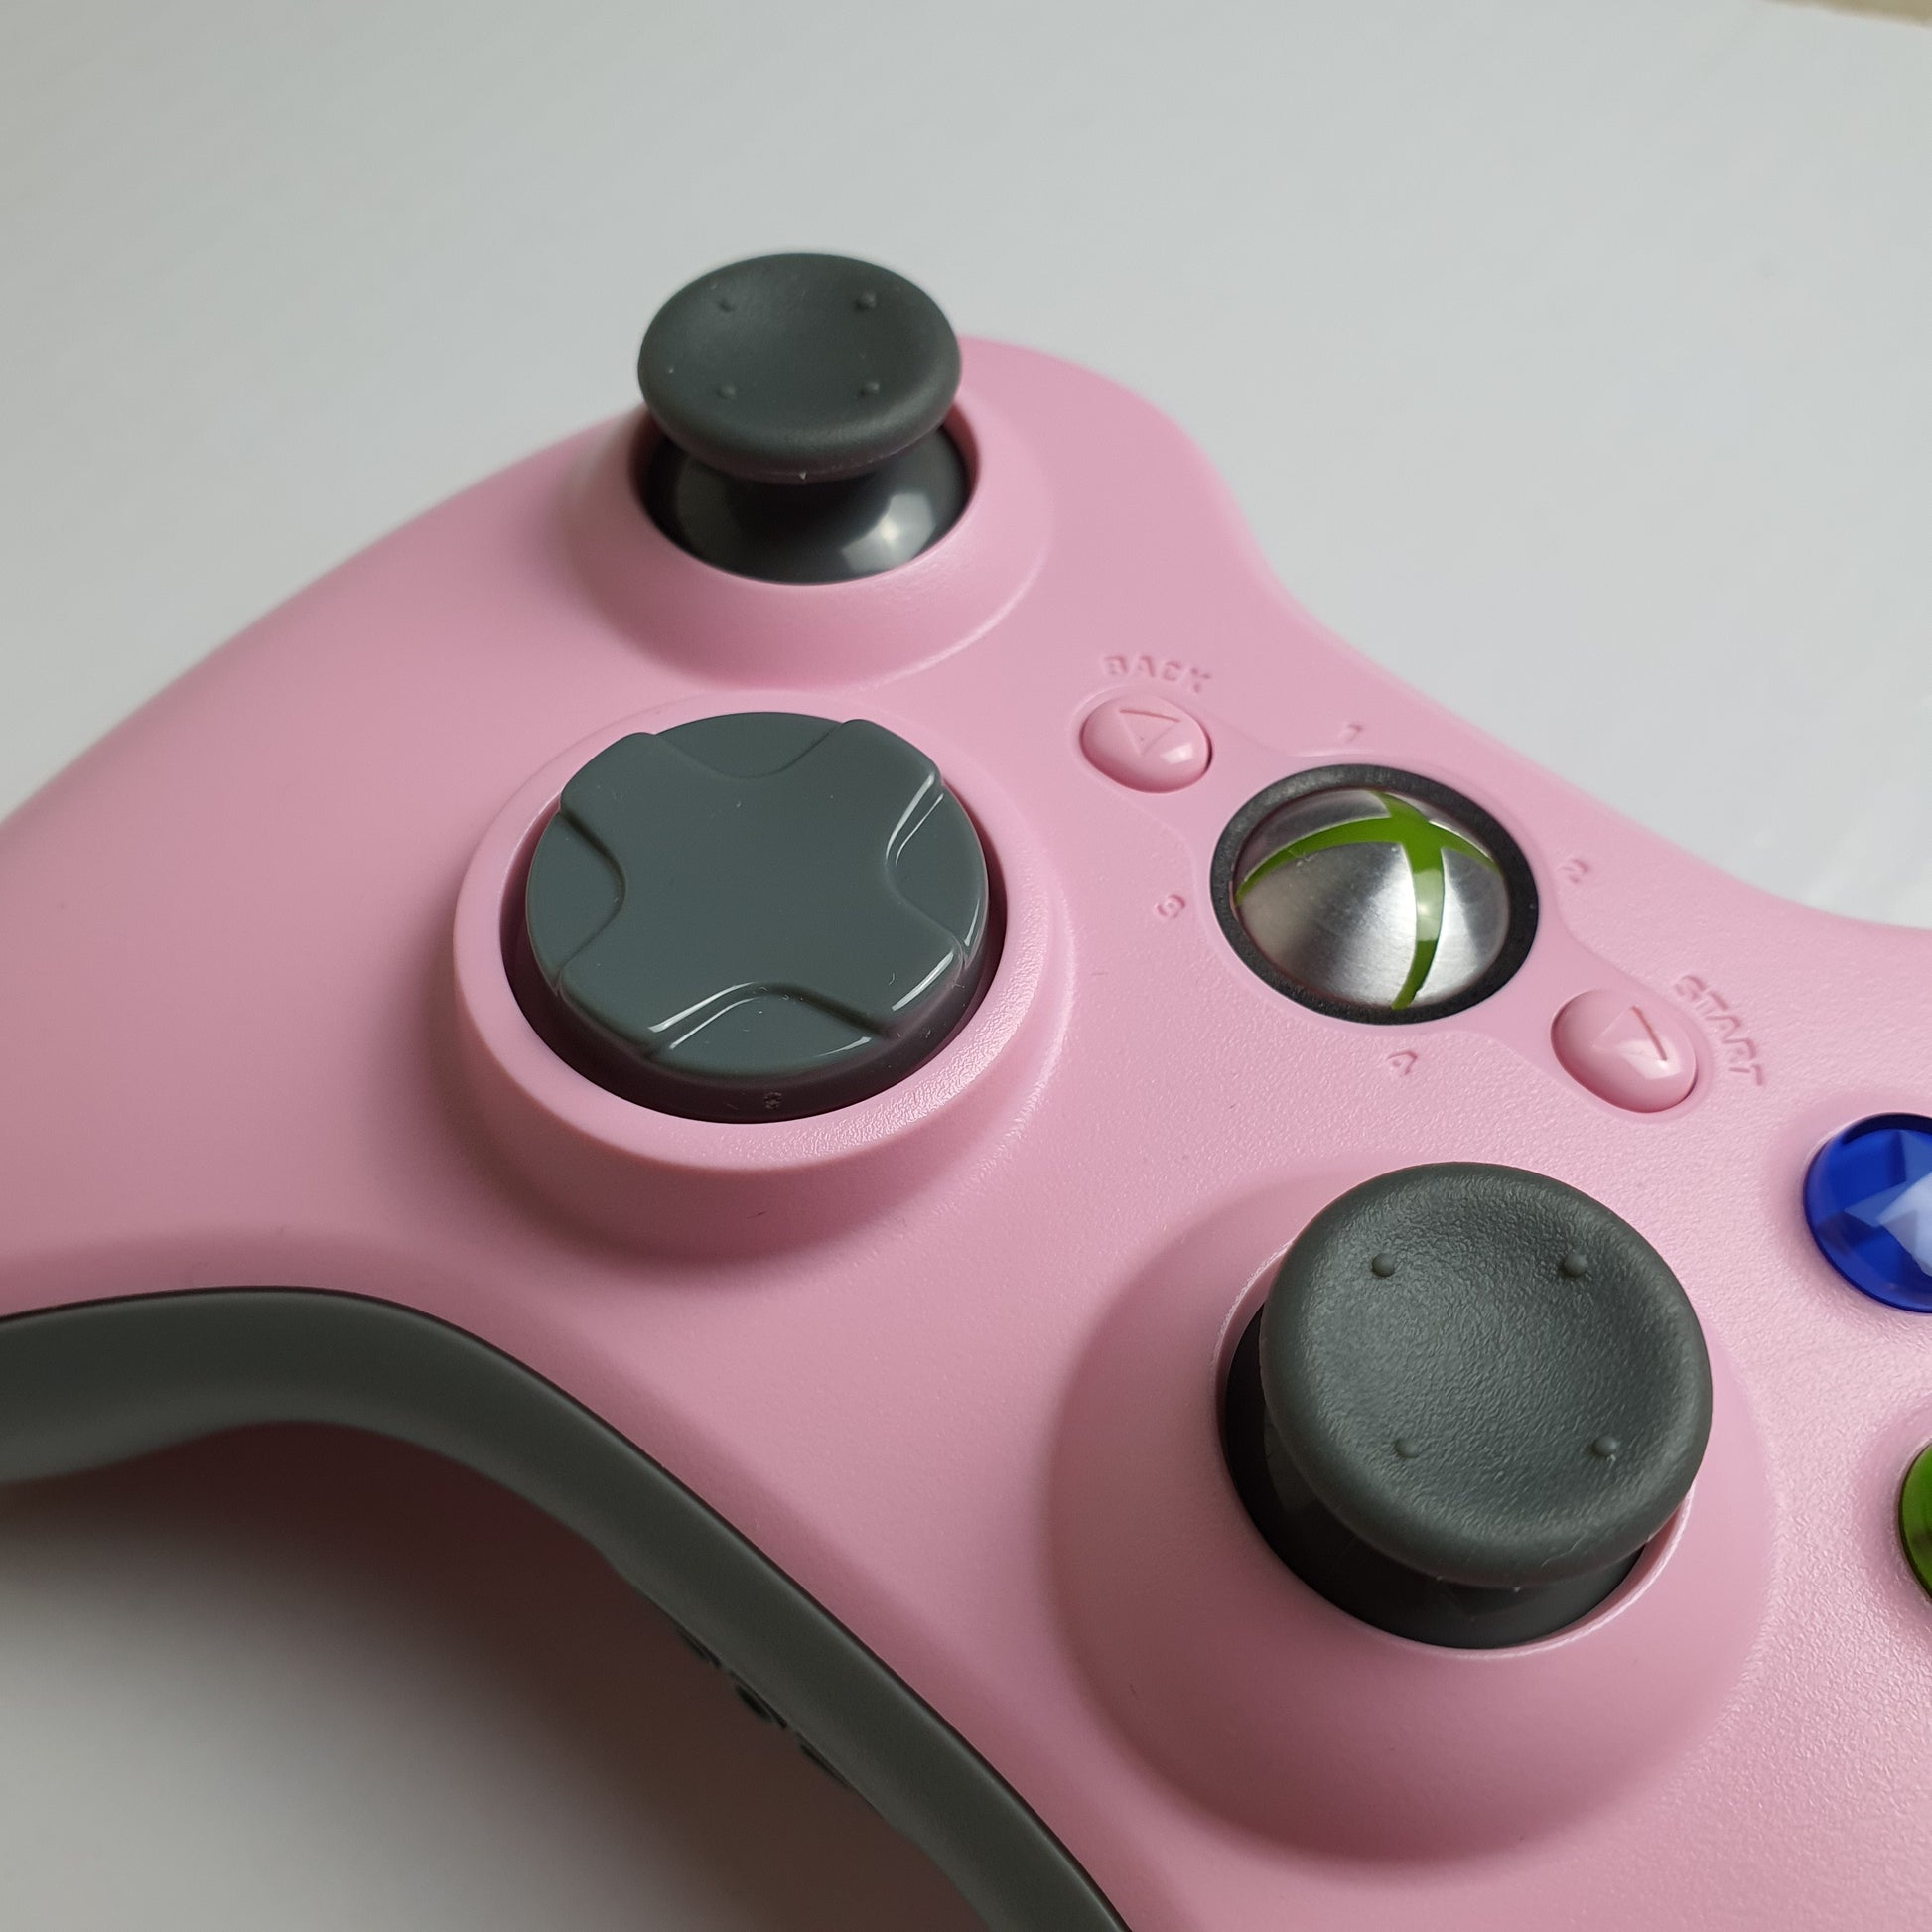 Xbox 360 Wireless Controller Pink